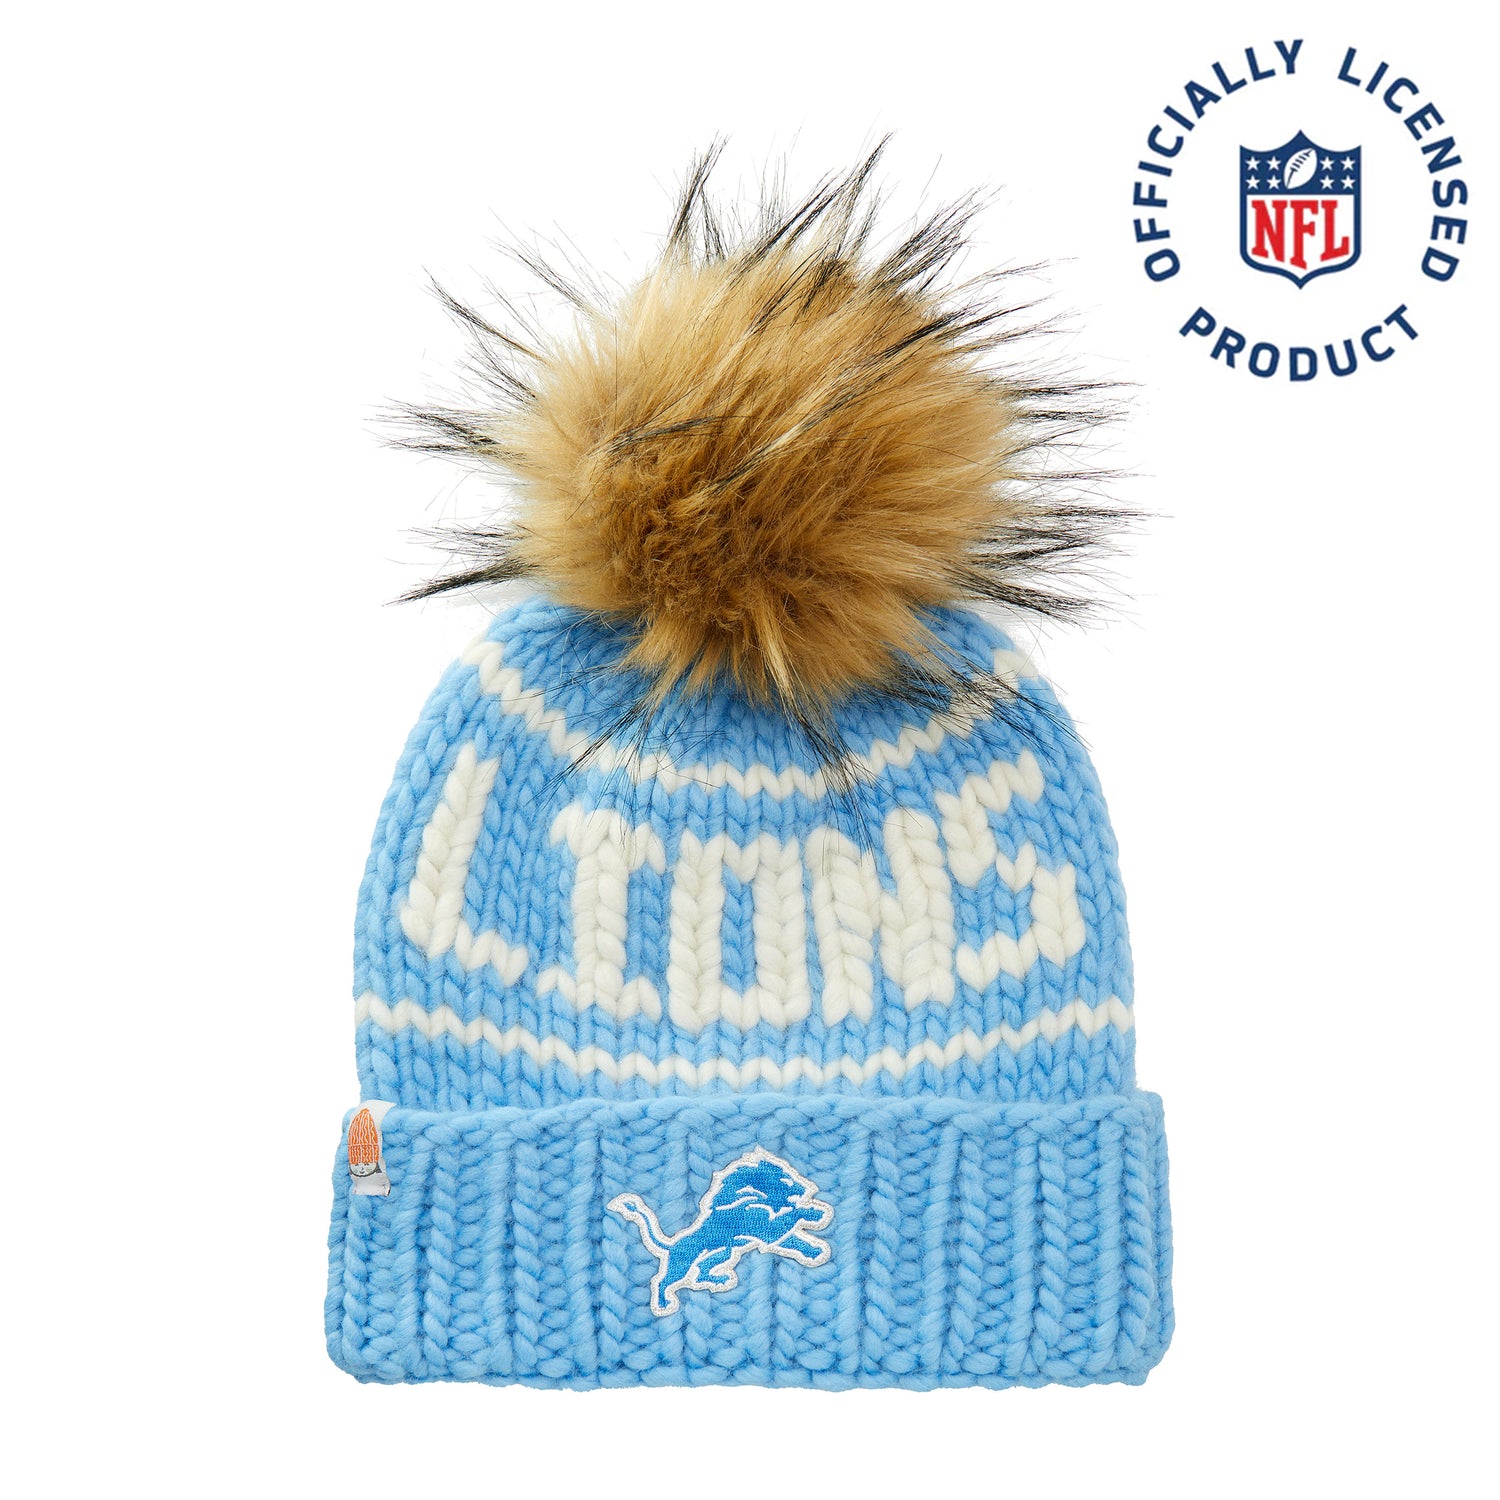 The Lions NFL Beanie with Faux Fur Pom